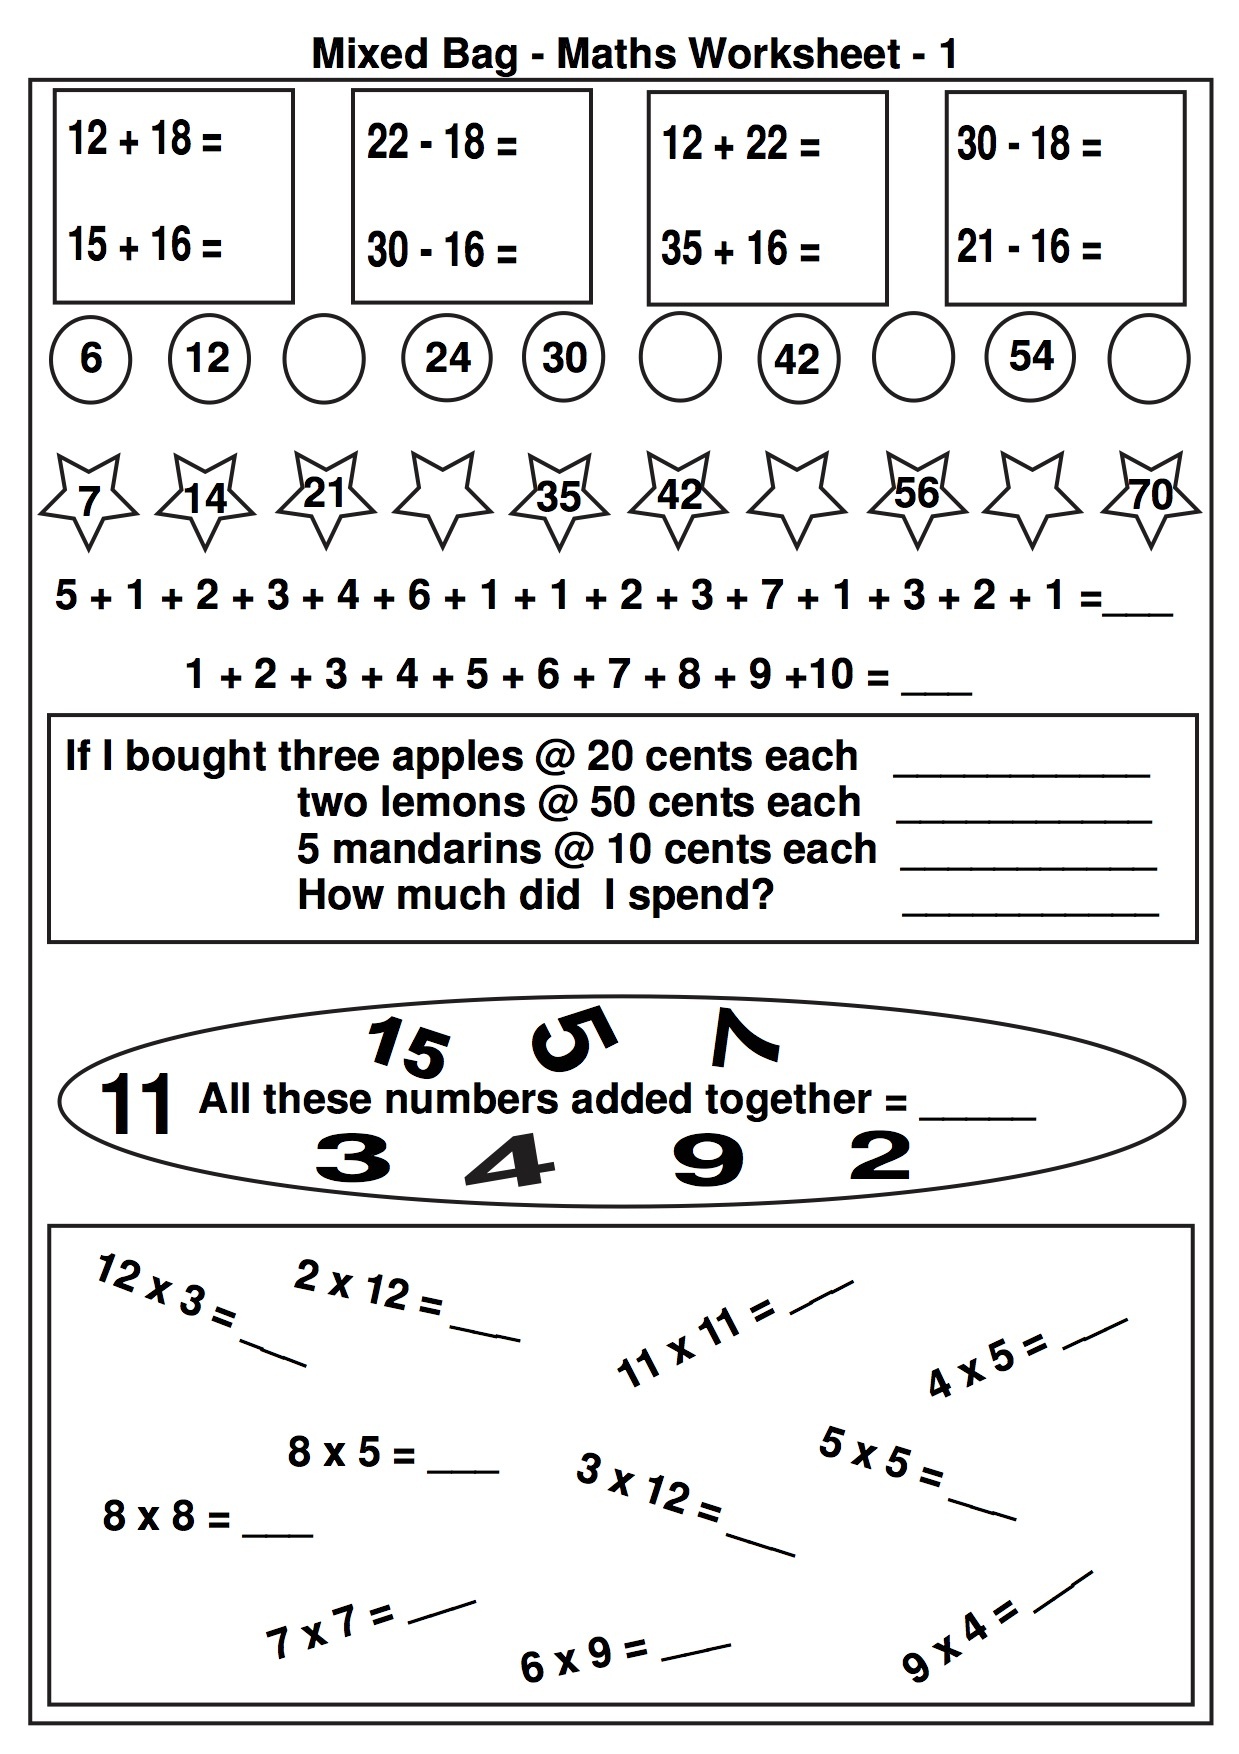 Free Math Worksheets And Printable Math Activities For Elementary - Free Math Printables